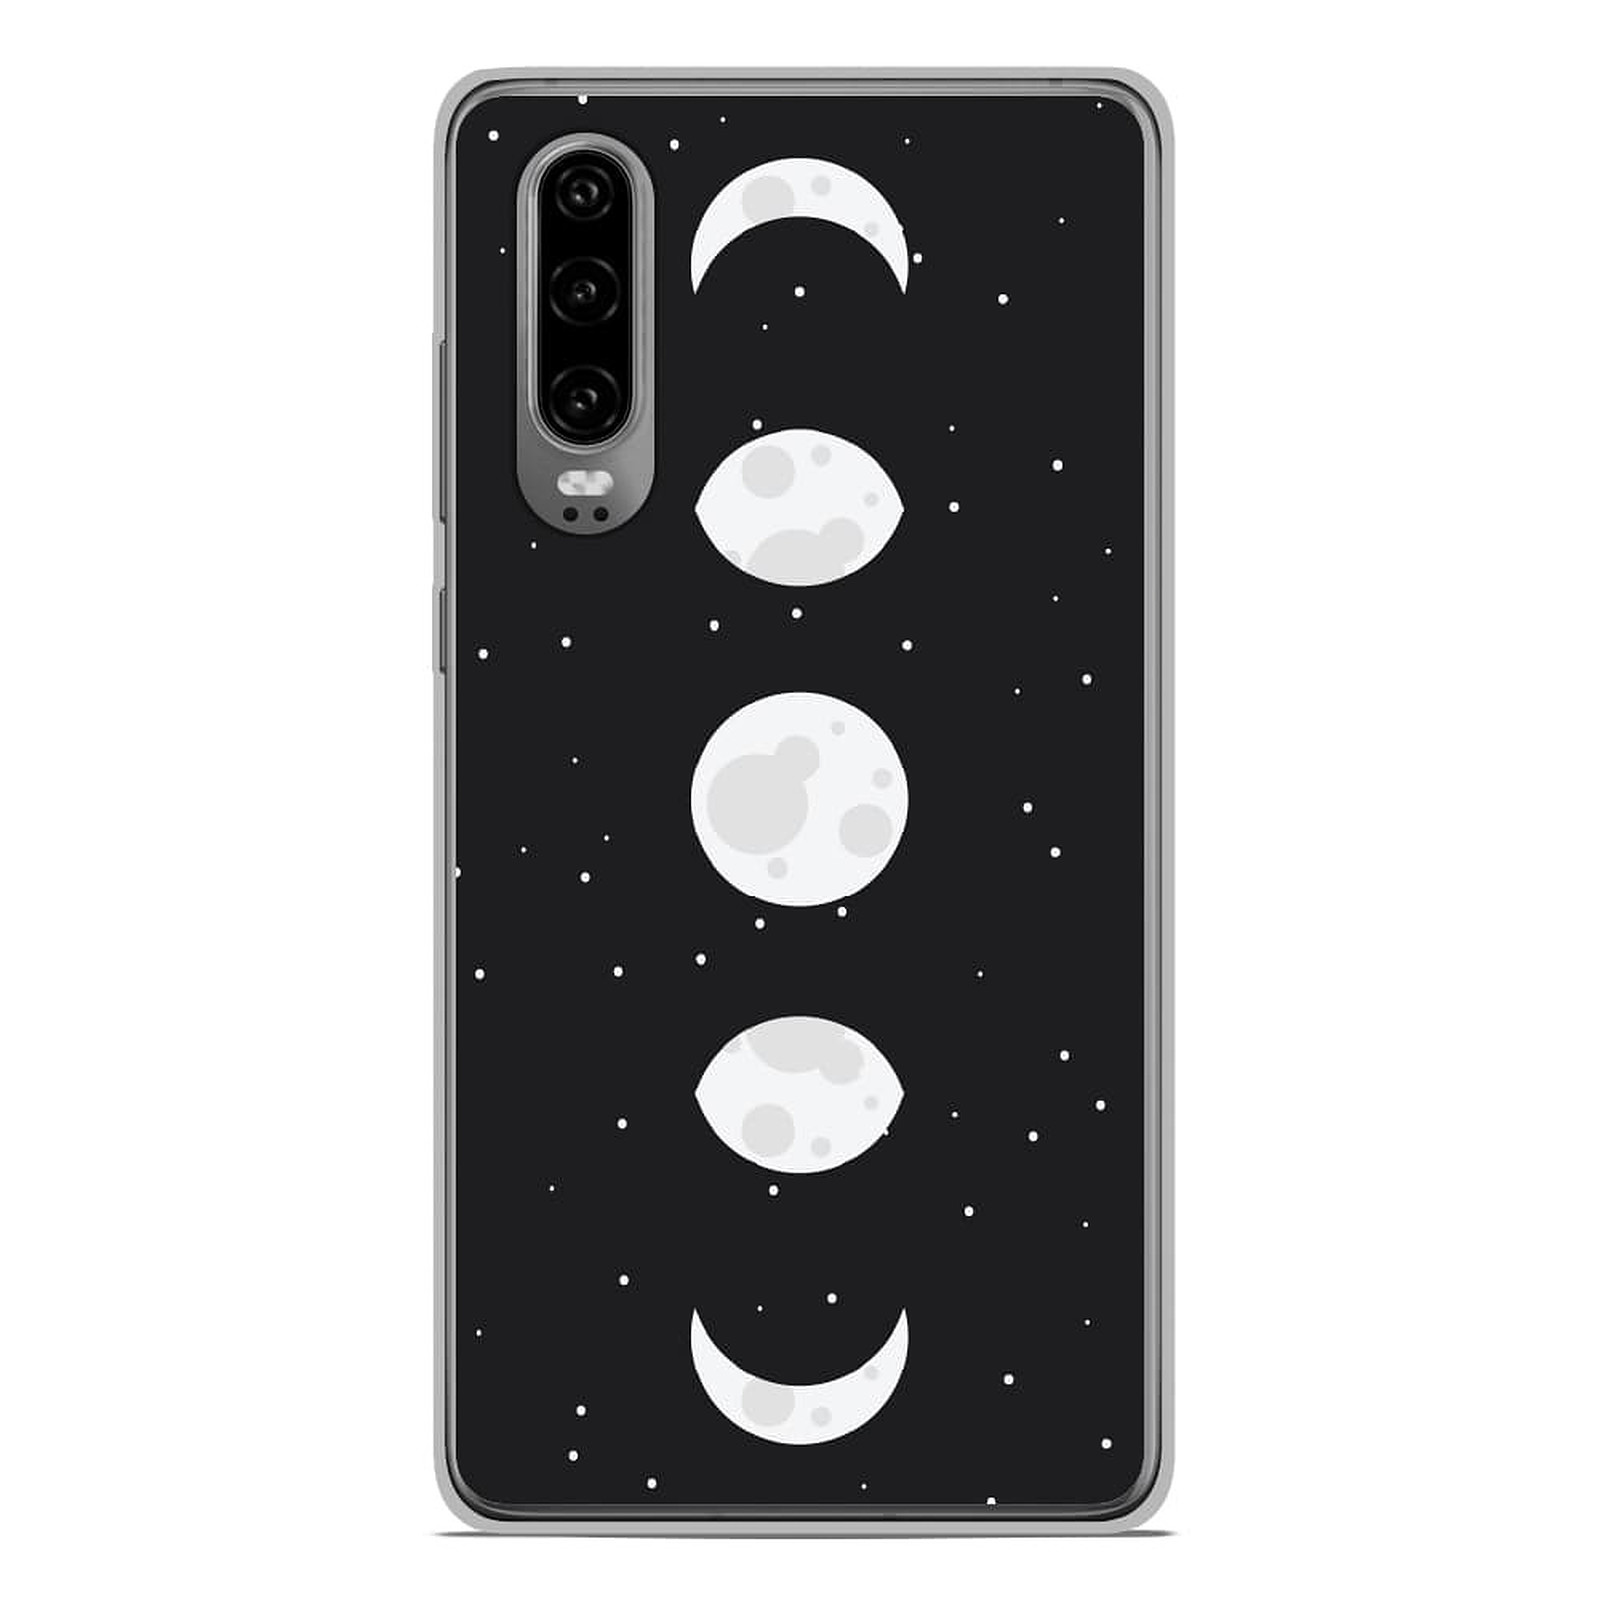 1001 Coques Coque silicone gel Huawei P30 motif Phase de Lune - Coque telephone 1001Coques